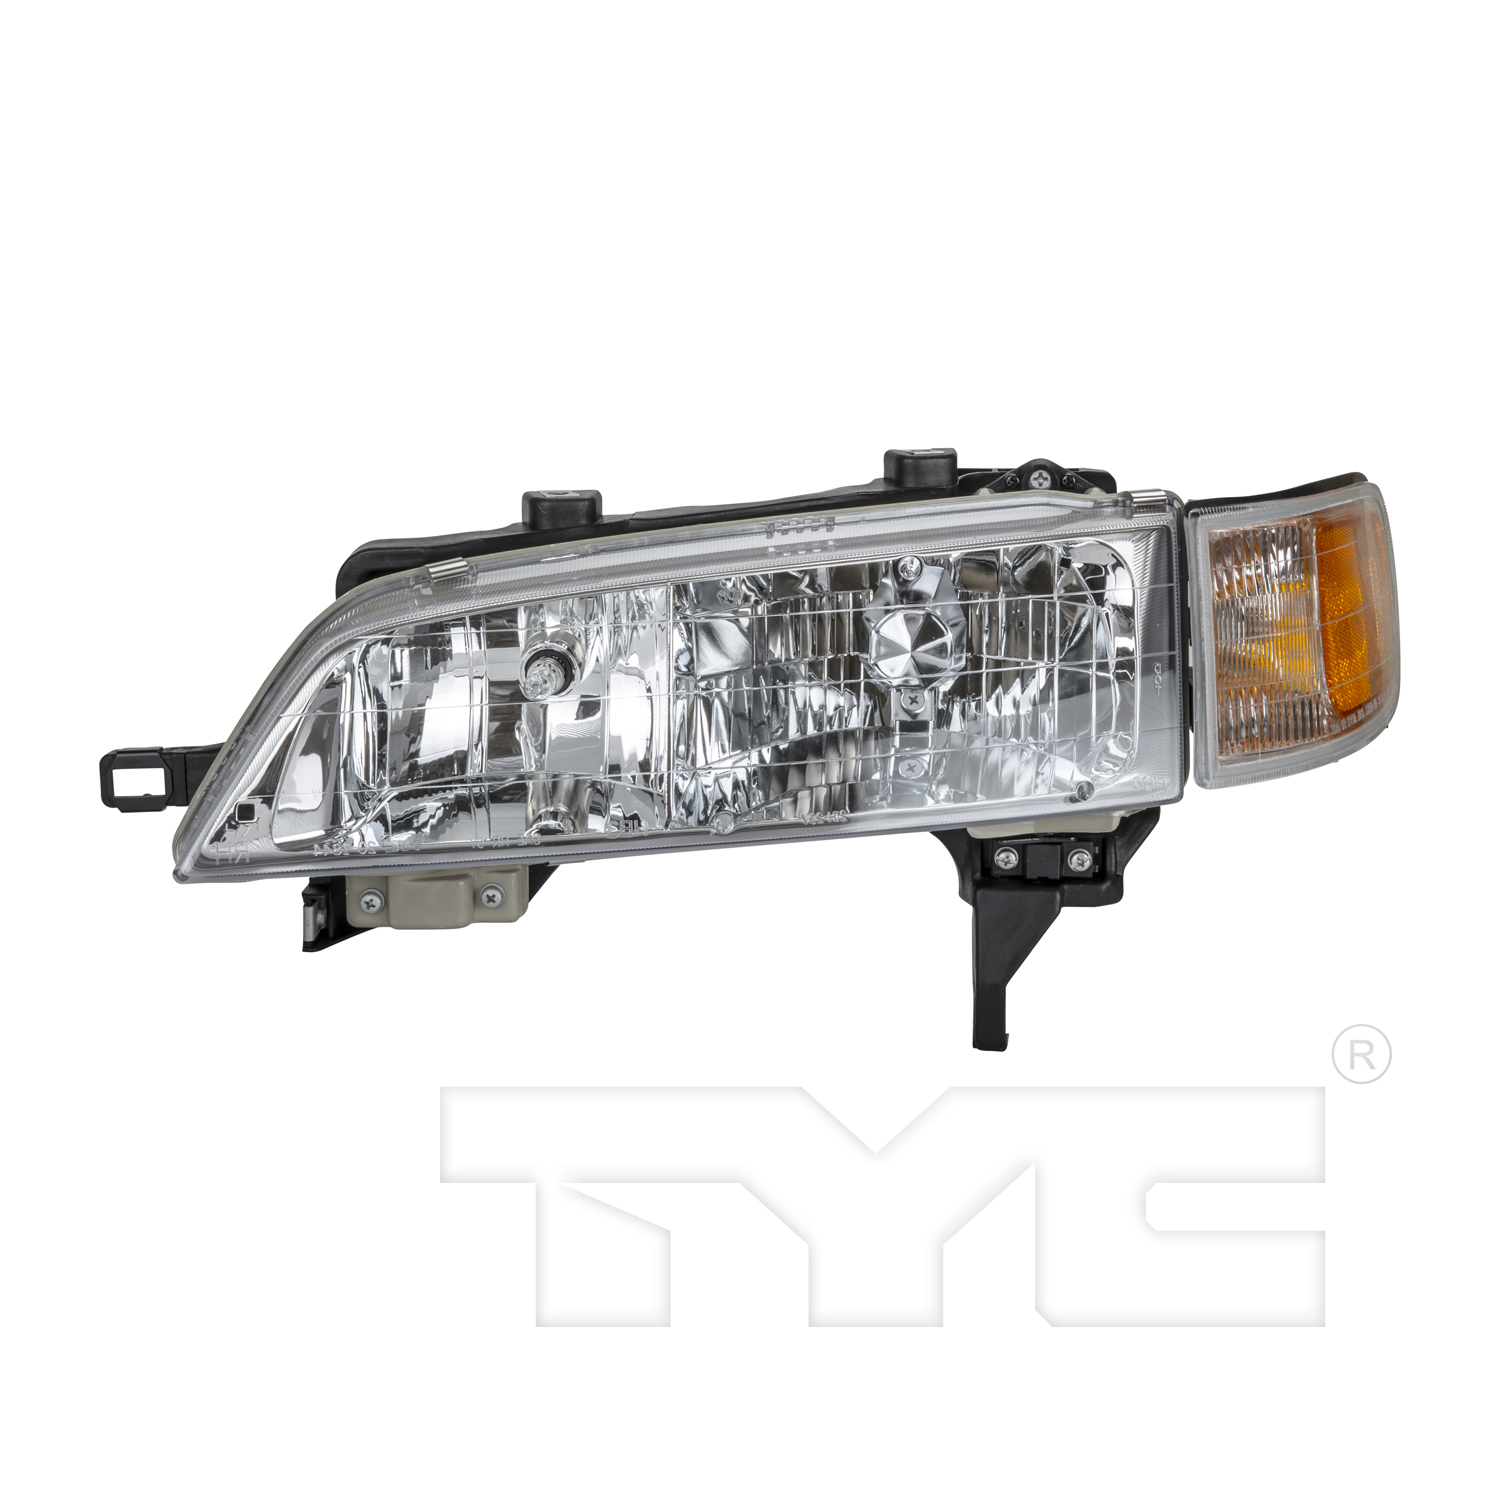 Aftermarket HEADLIGHTS for HONDA - ACCORD, ACCORD,94-97,LT Headlamp assy composite